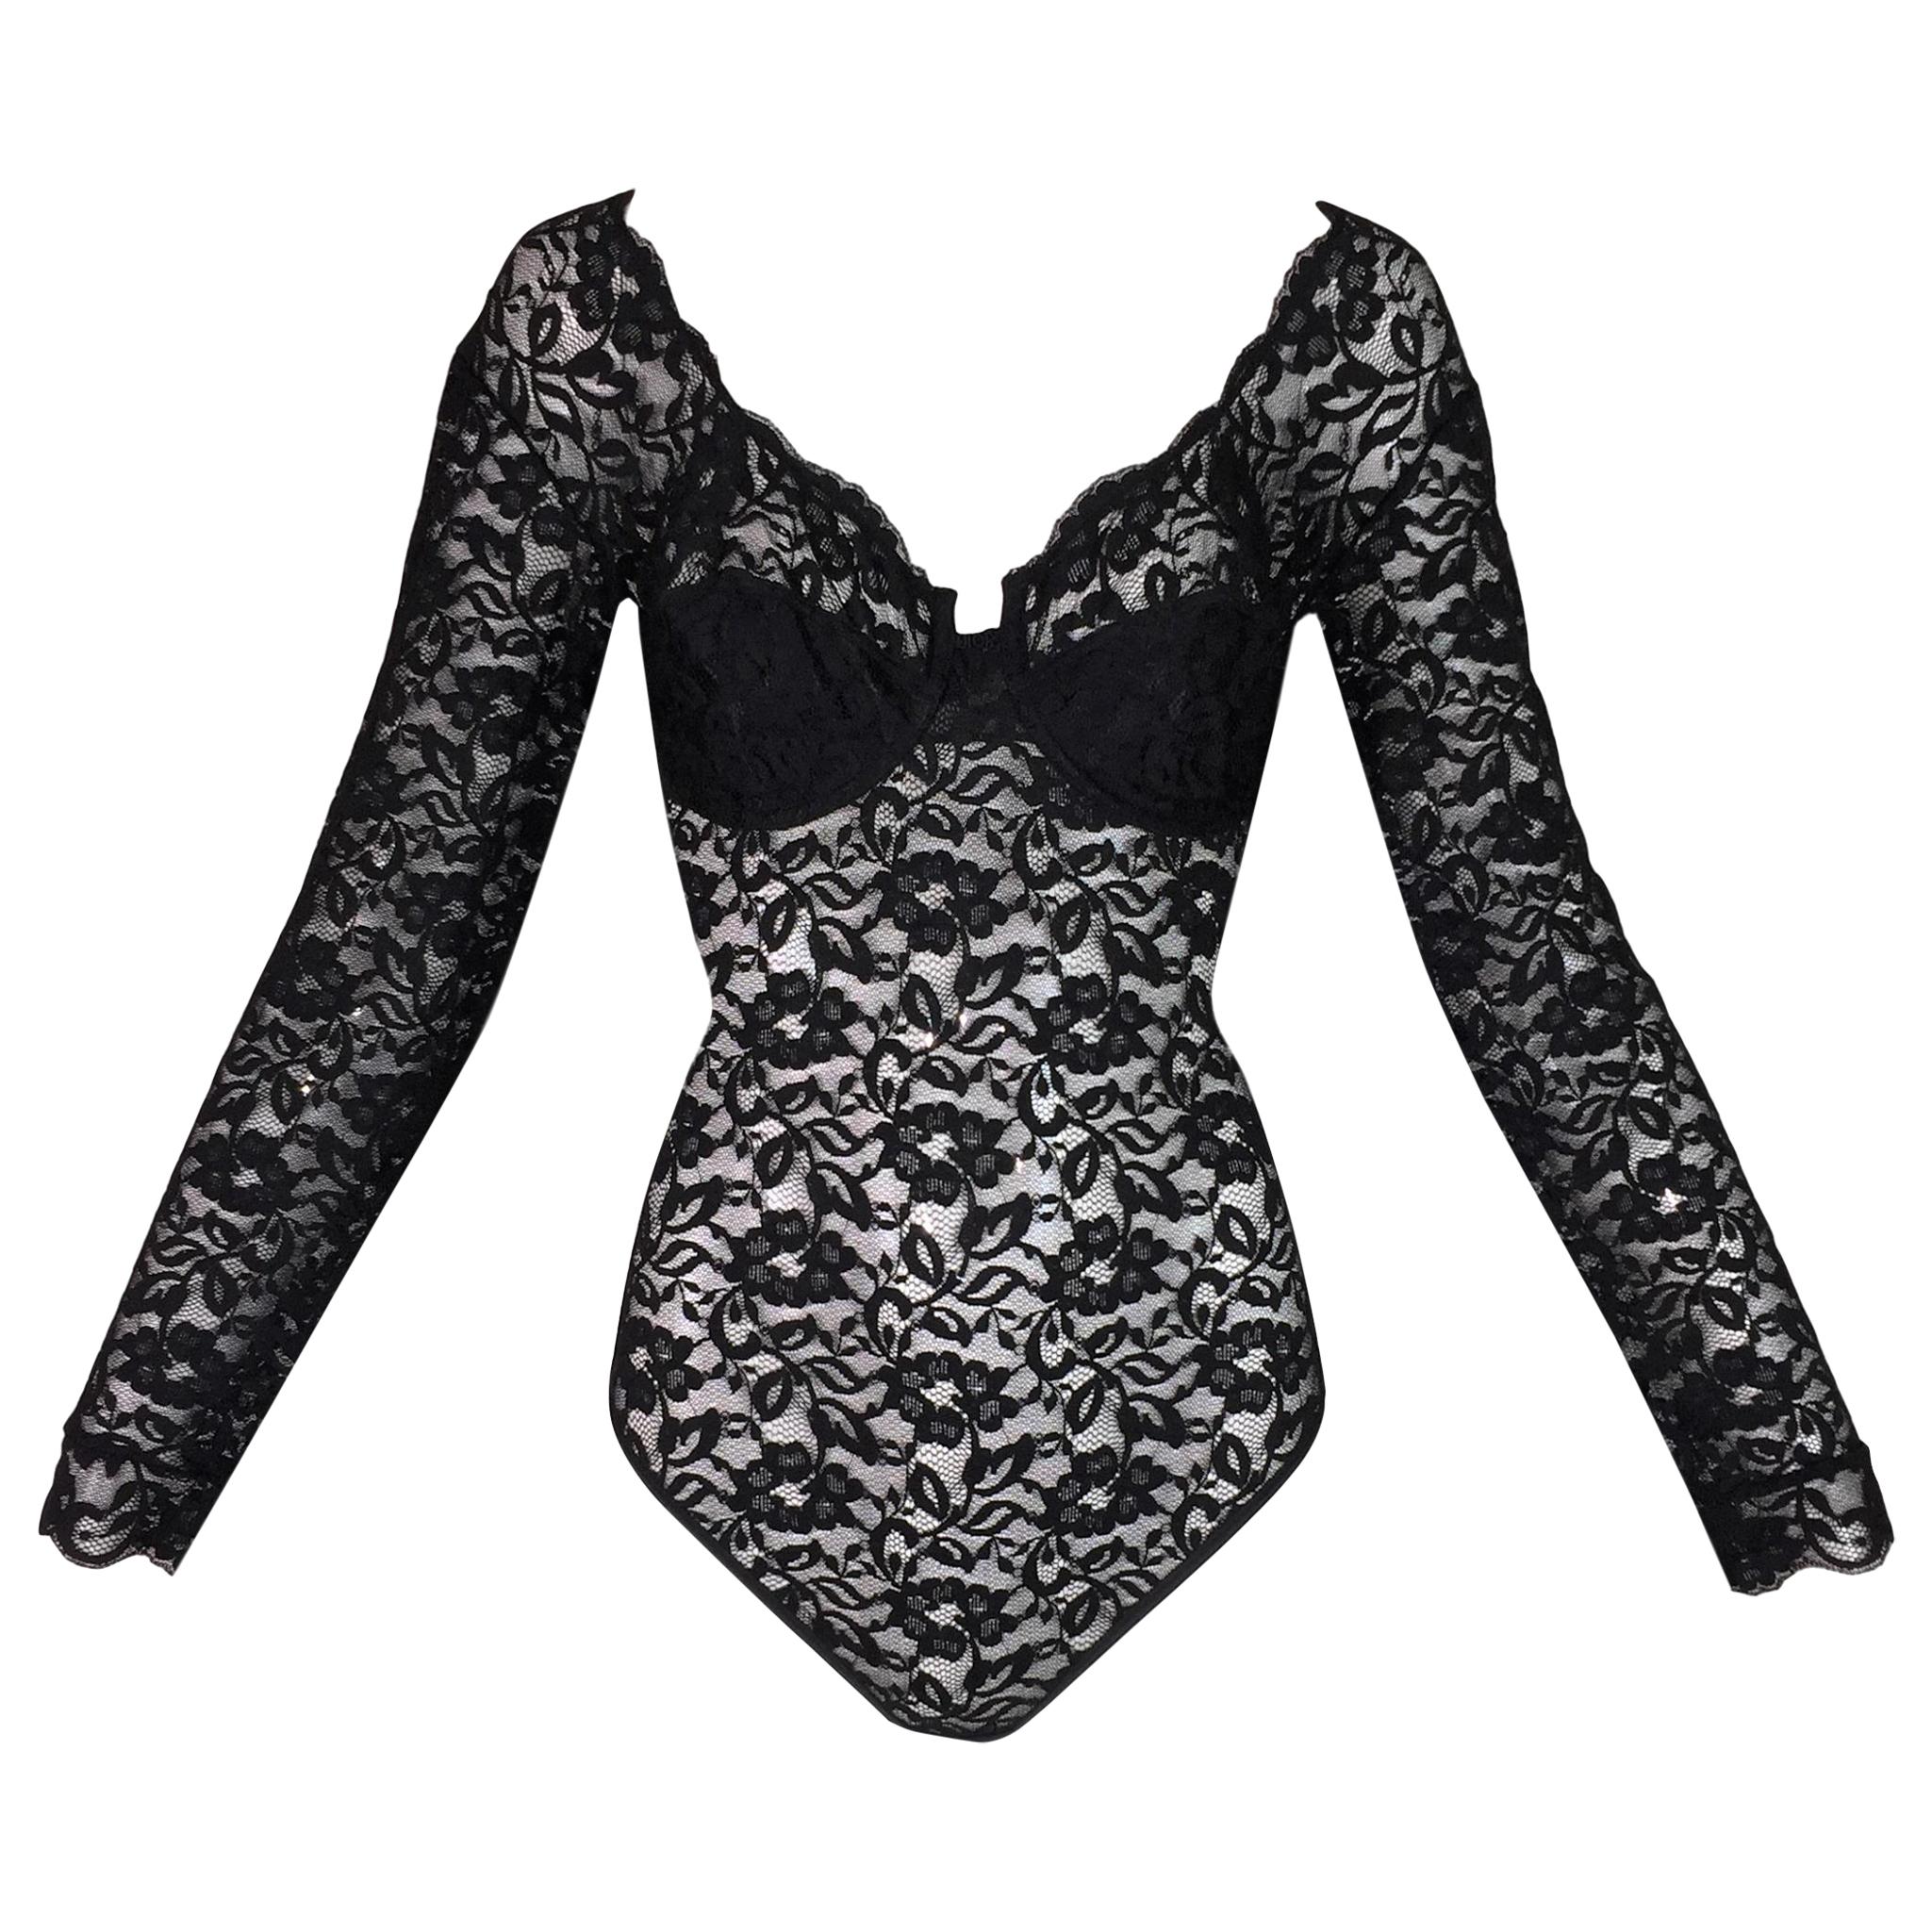 NWT 1990's Christian Dior Sheer Black Lace Pin-Up L/S Bodysuit Top